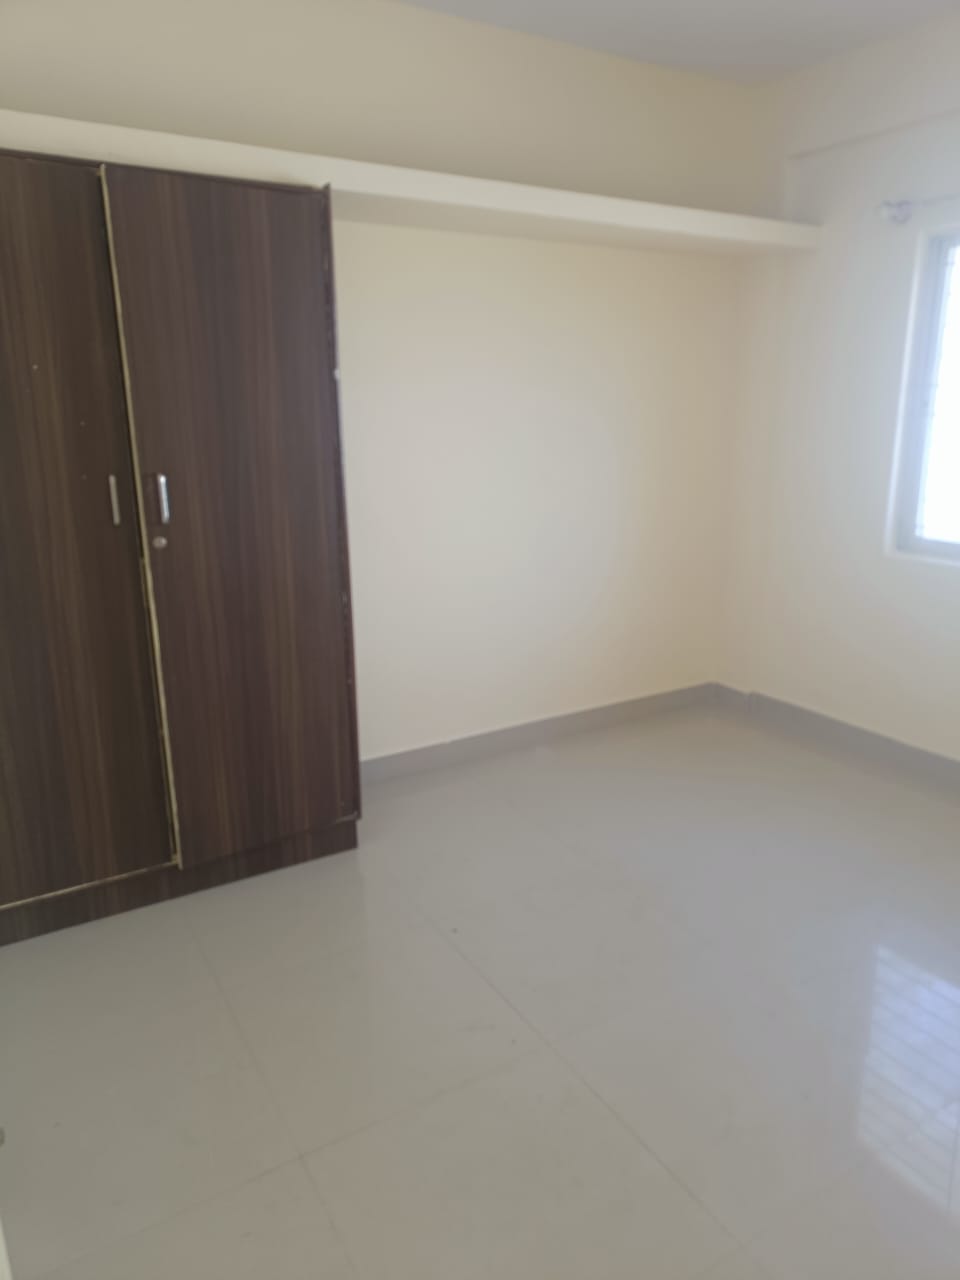 3 BHK Residential Apartment for Lease Only at JAML2 - 1916 in Laggere